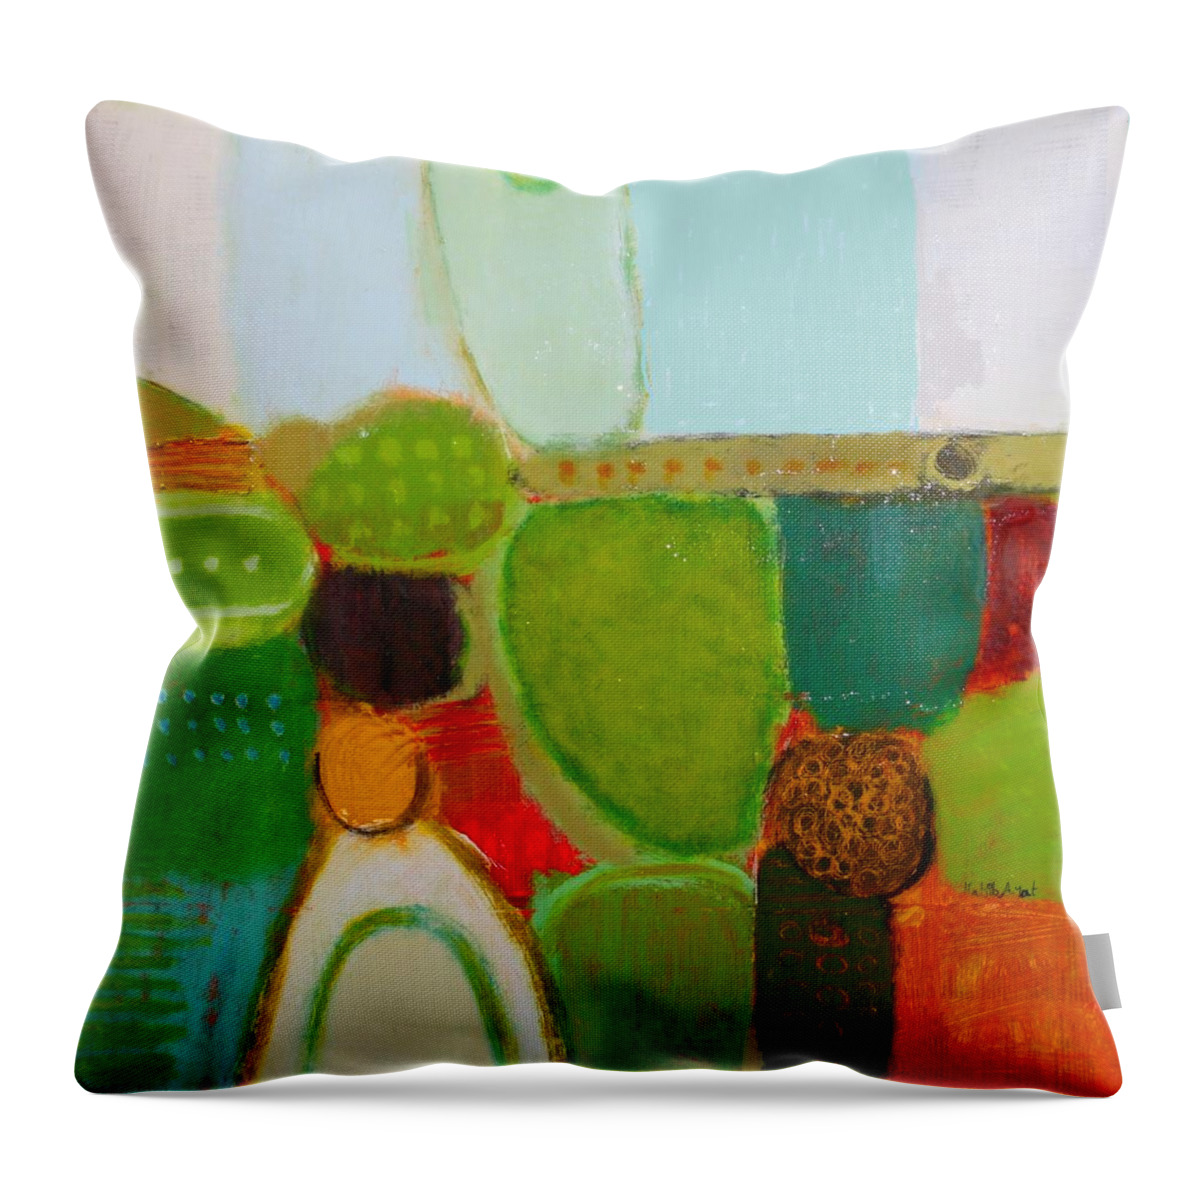 Abstract Throw Pillow featuring the painting Peace And Joy 4 by Habib Ayat